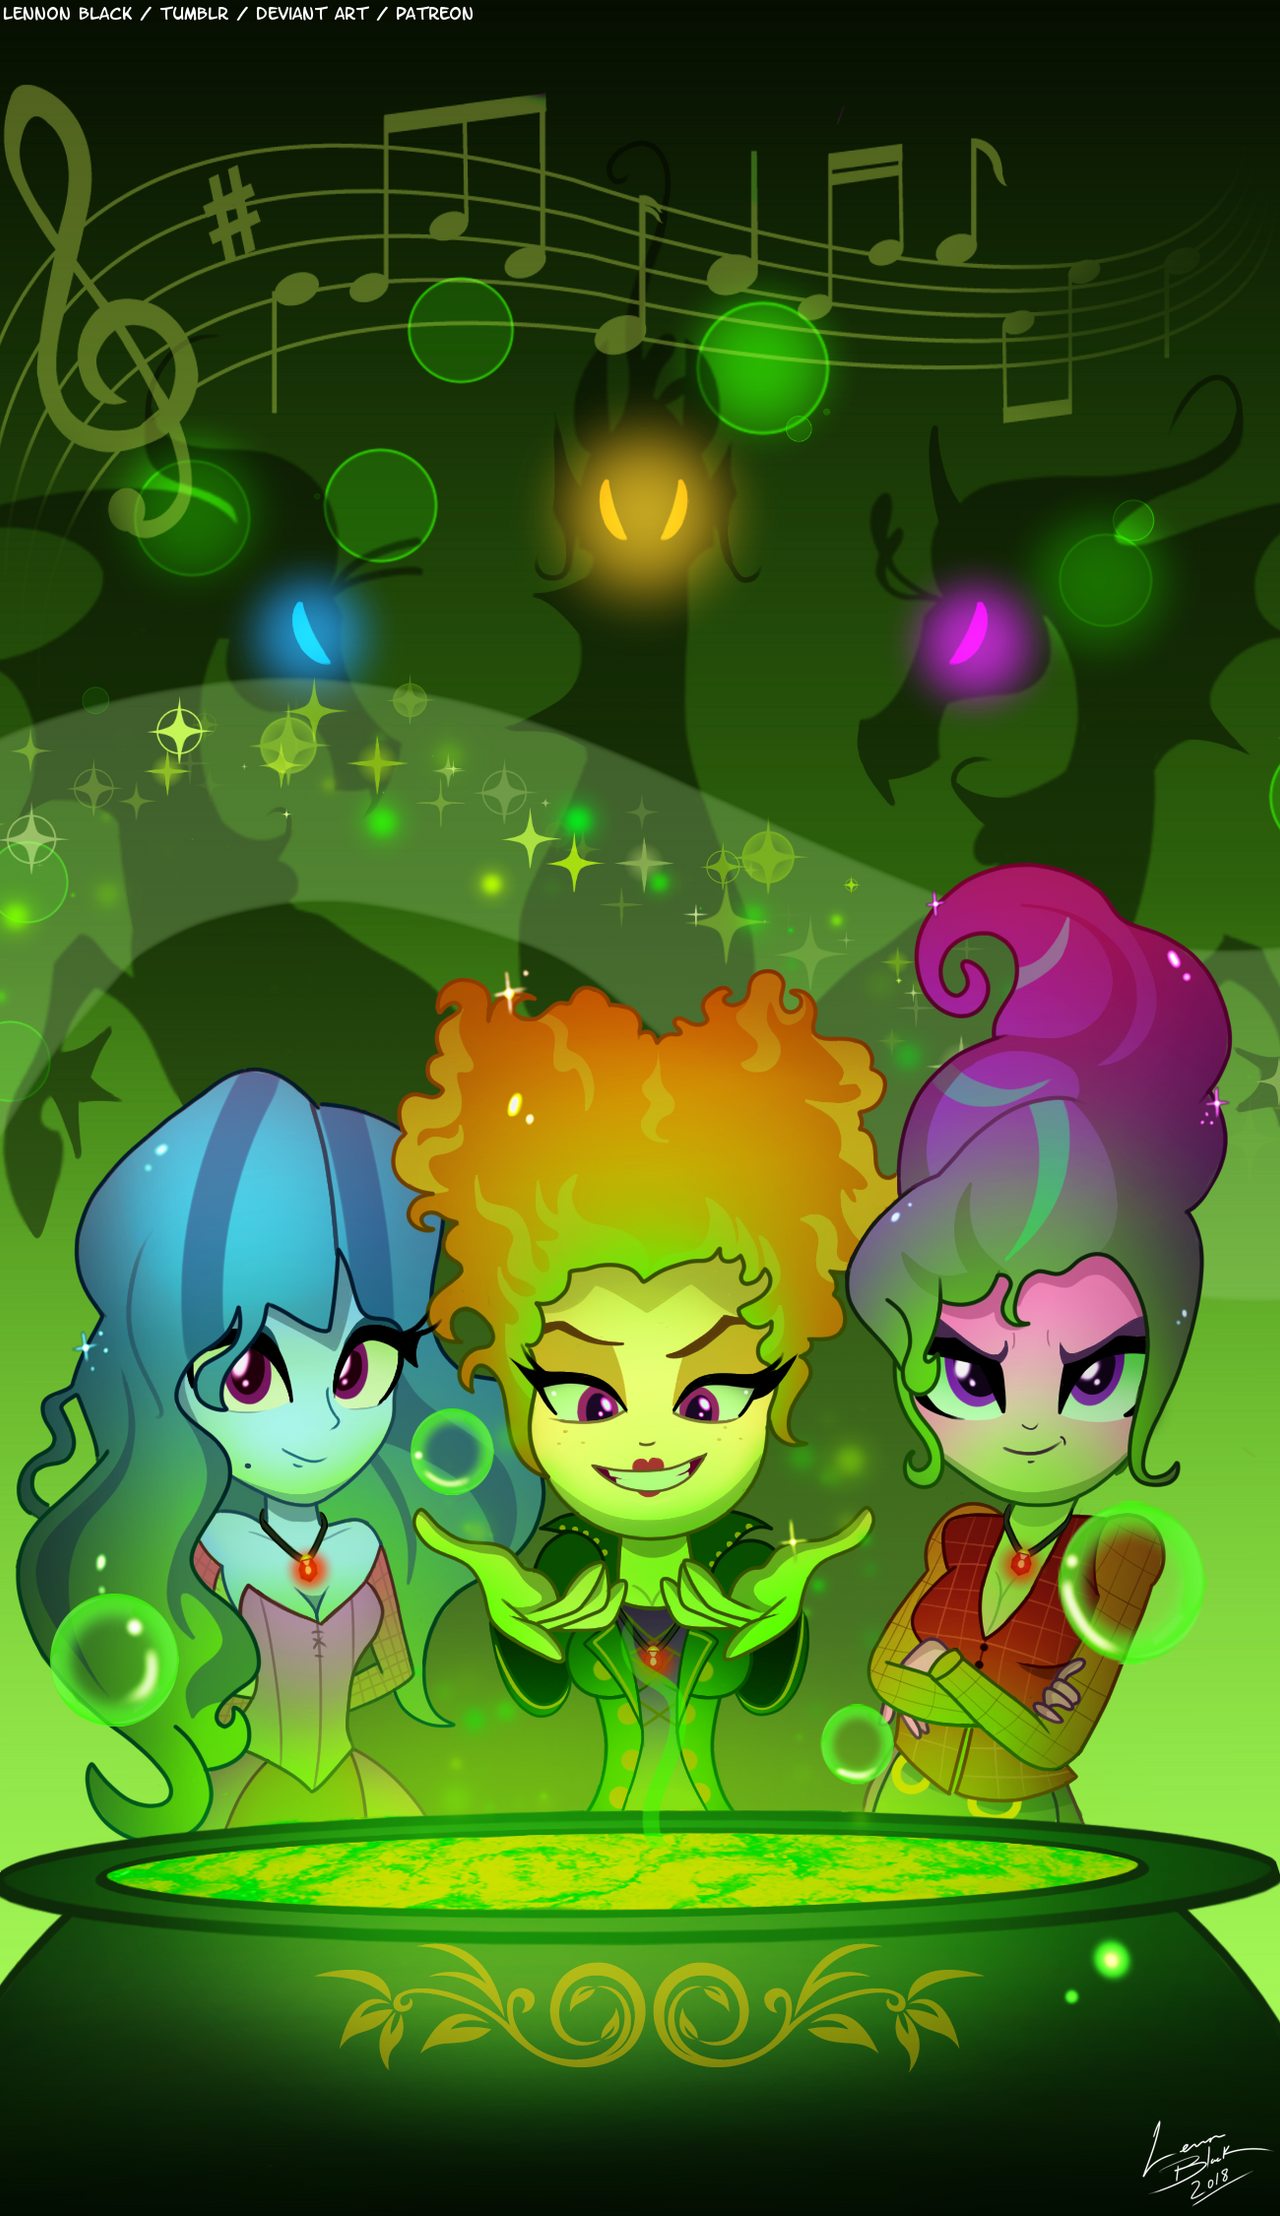 under_our_spell__happy_nightmare_night_2018___by_lennonblack_dcqpz3g-fullview.png